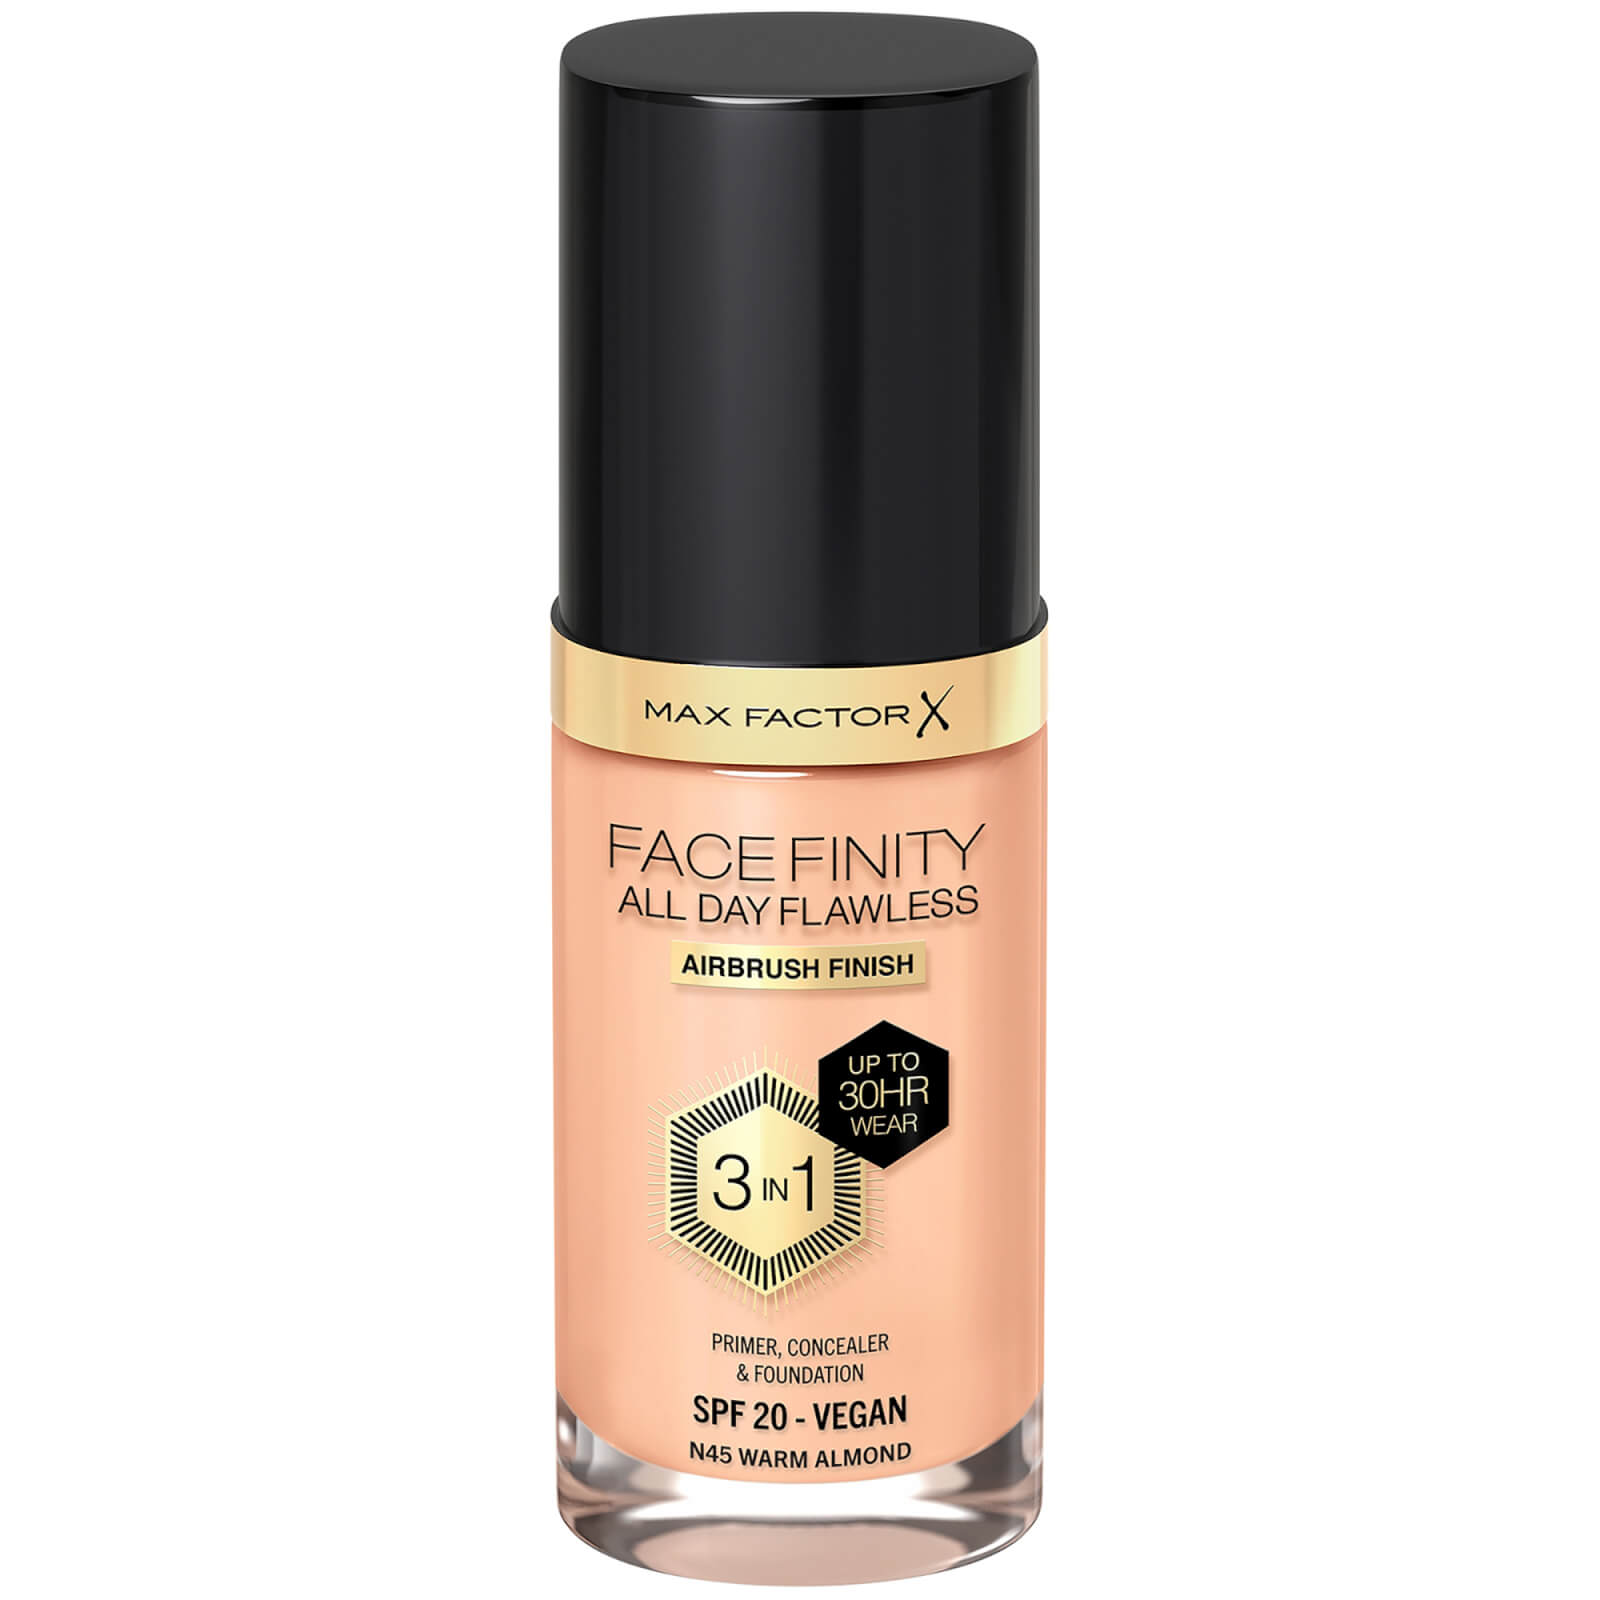 Max Factor Facefinity All Day Flawless 3 in 1 Vegan Foundation 30ml (Various Shades) - N45 - WARM AL